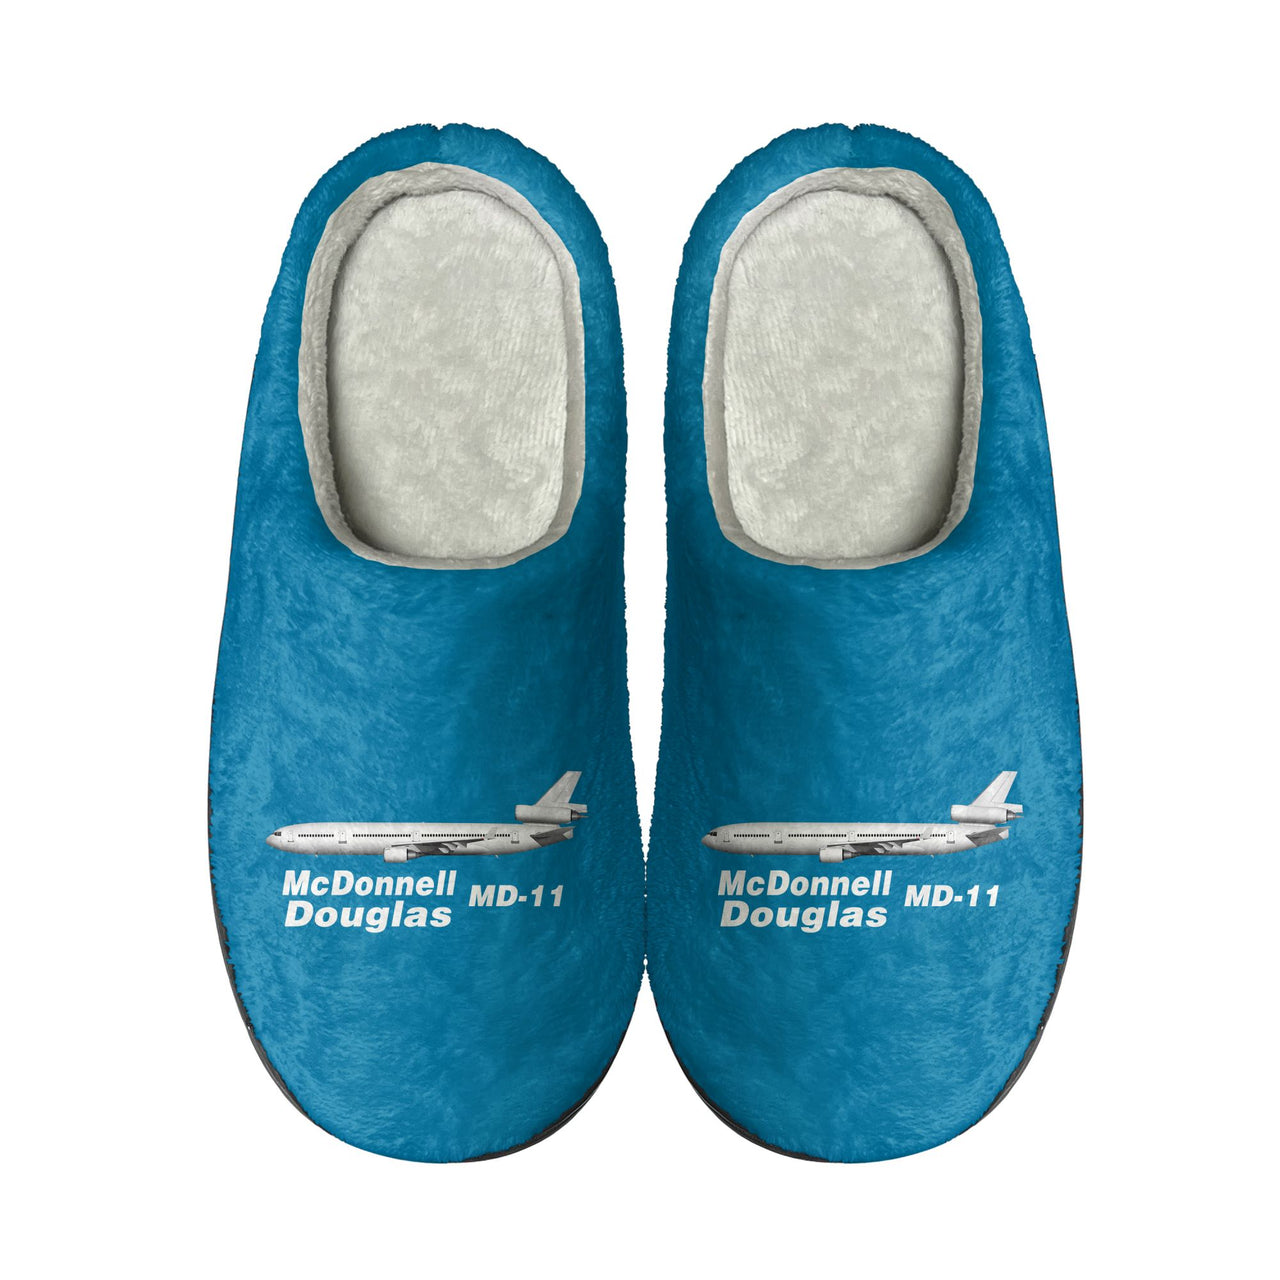 The McDonnell Douglas MD-11 Designed Cotton Slippers